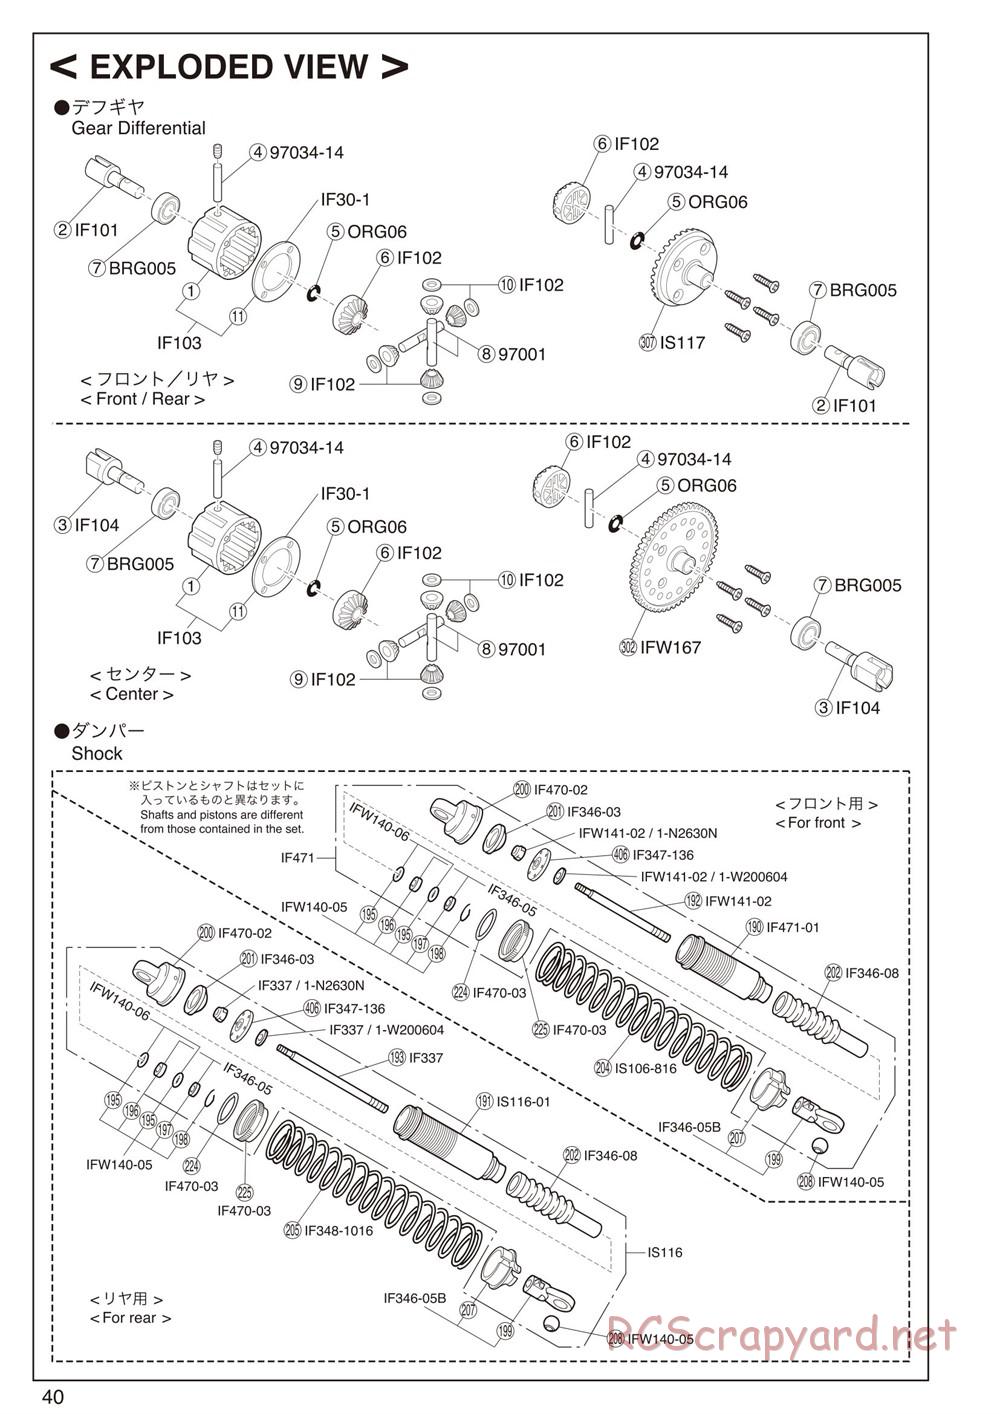 Kyosho - Inferno ST-RR Evo.2 - Exploded Views - Page 2